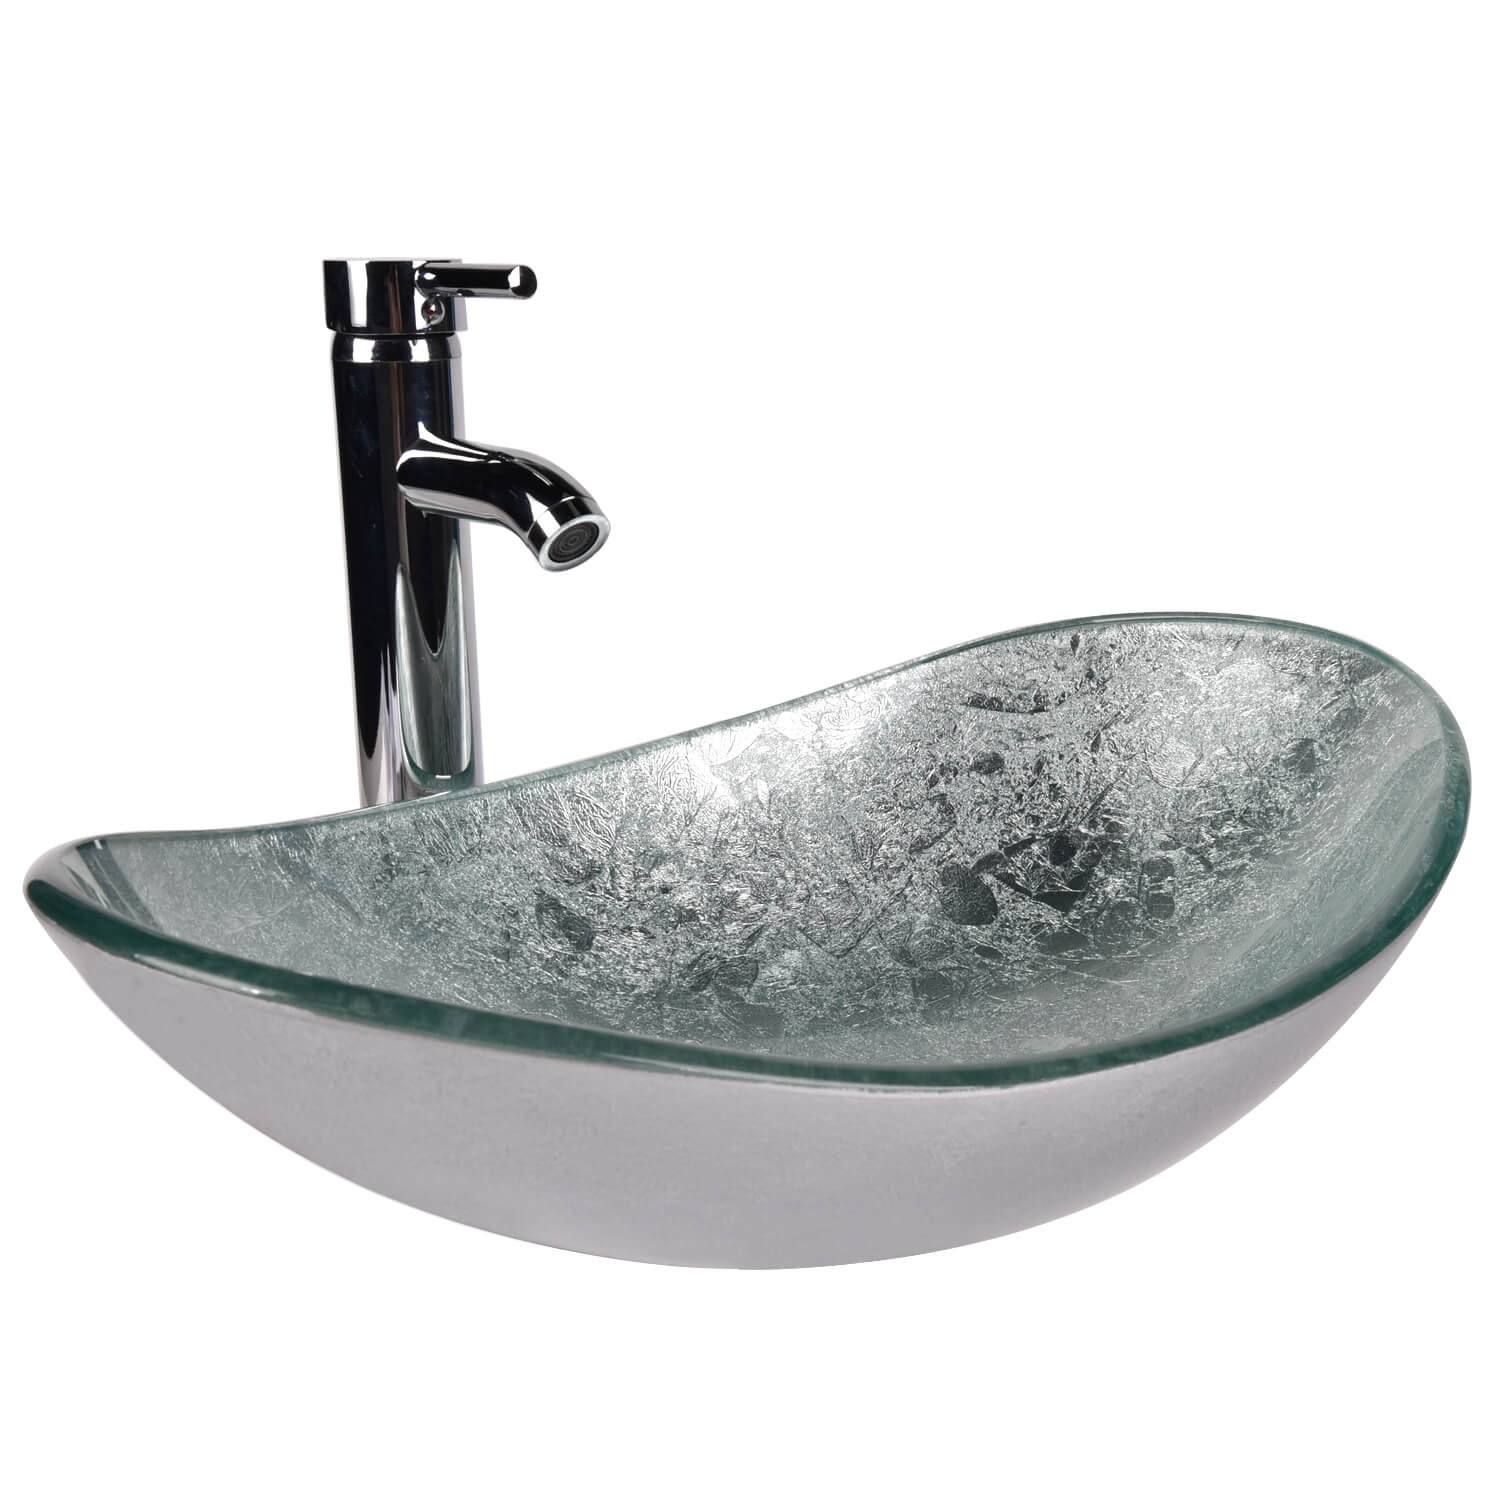 Elecwish Vessel Sinks Bathroom Artistic Glass Vessel Sink with Faucet Drain,Oval Silver